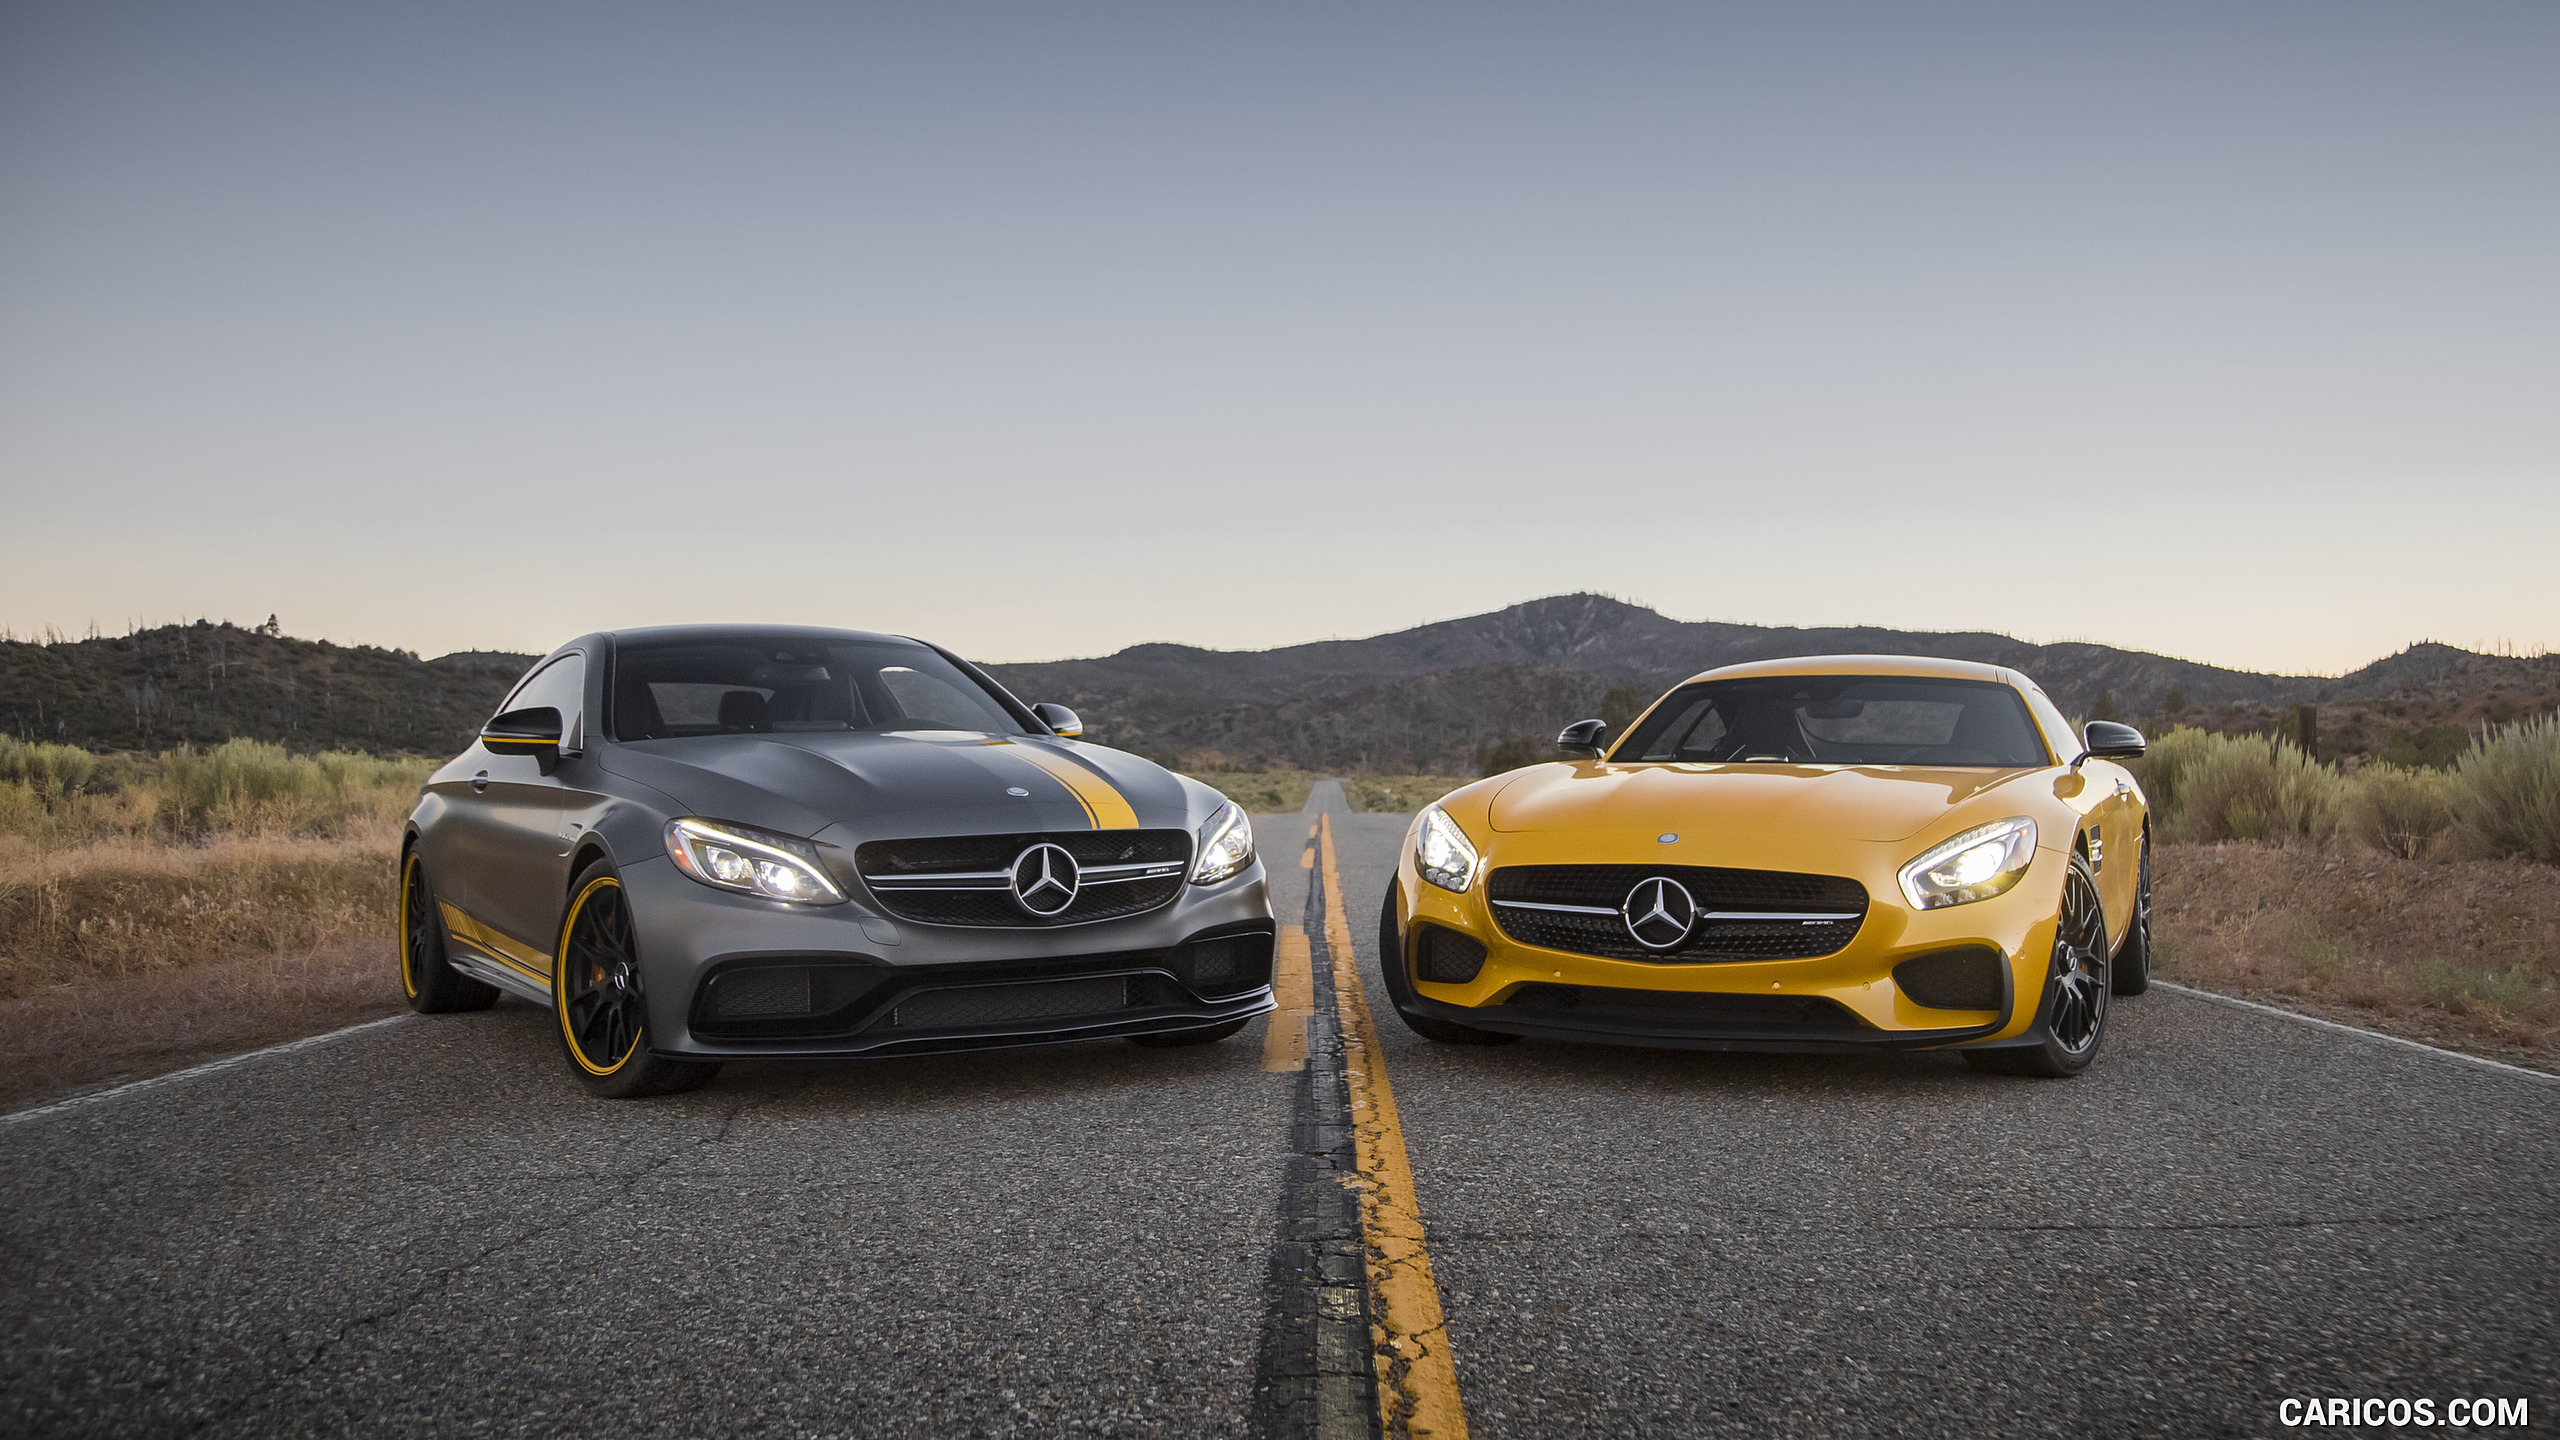 2017 Mercedes-AMG C63 S Coupe Edition One (US-Spec) and 2017 Mercedes-AMG GT S Coupe, #84 of 86